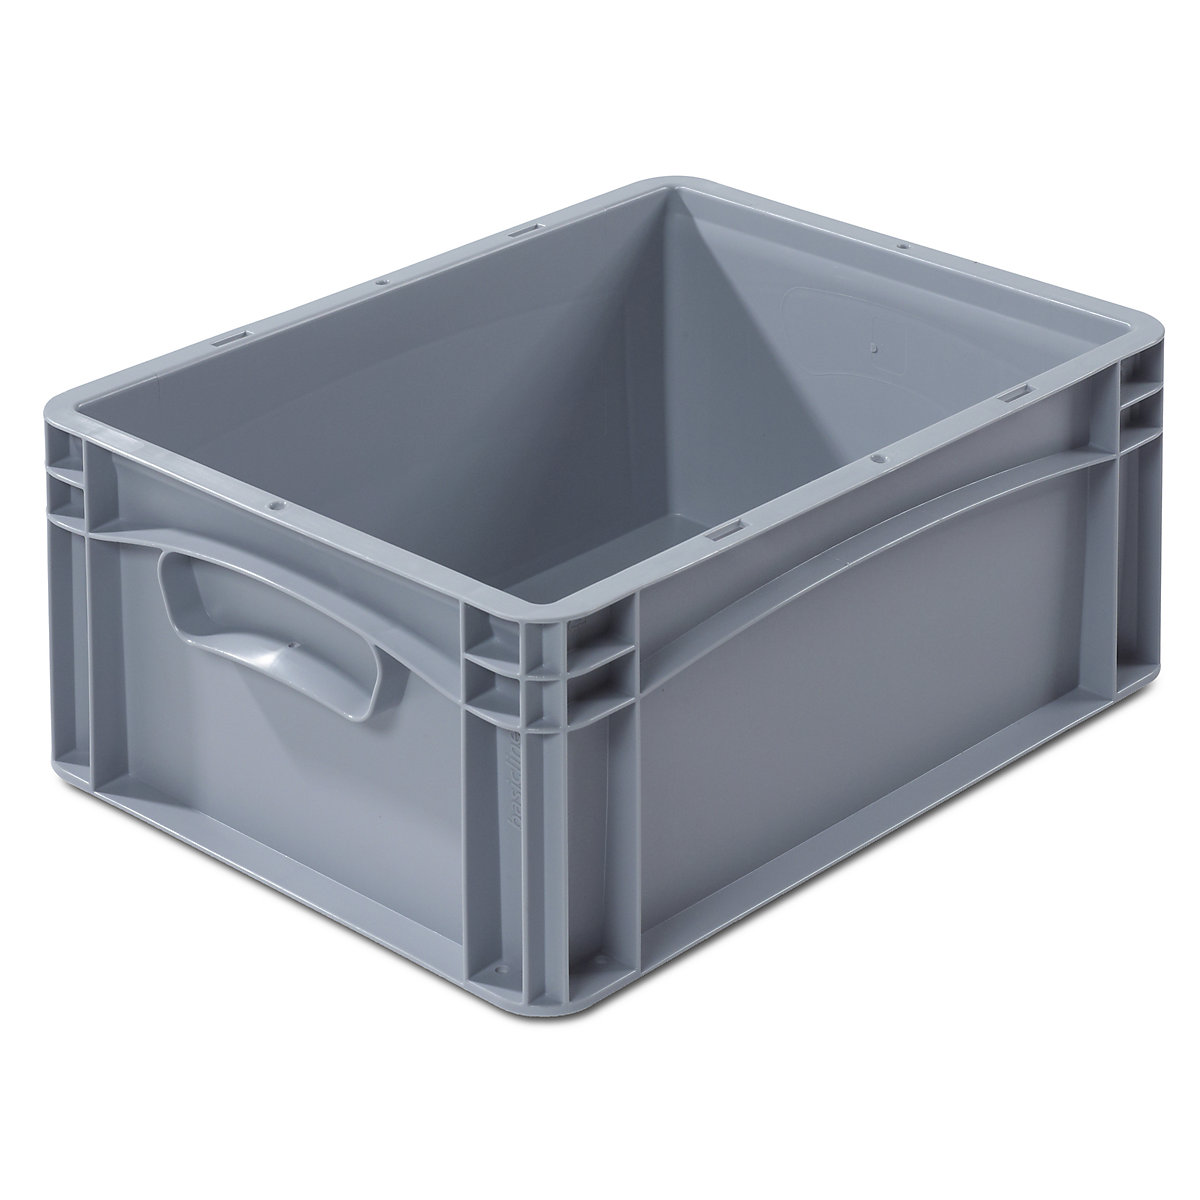 Euro size container, LxW 400 x 300 mm, solid walls and base, height 170 mm-6